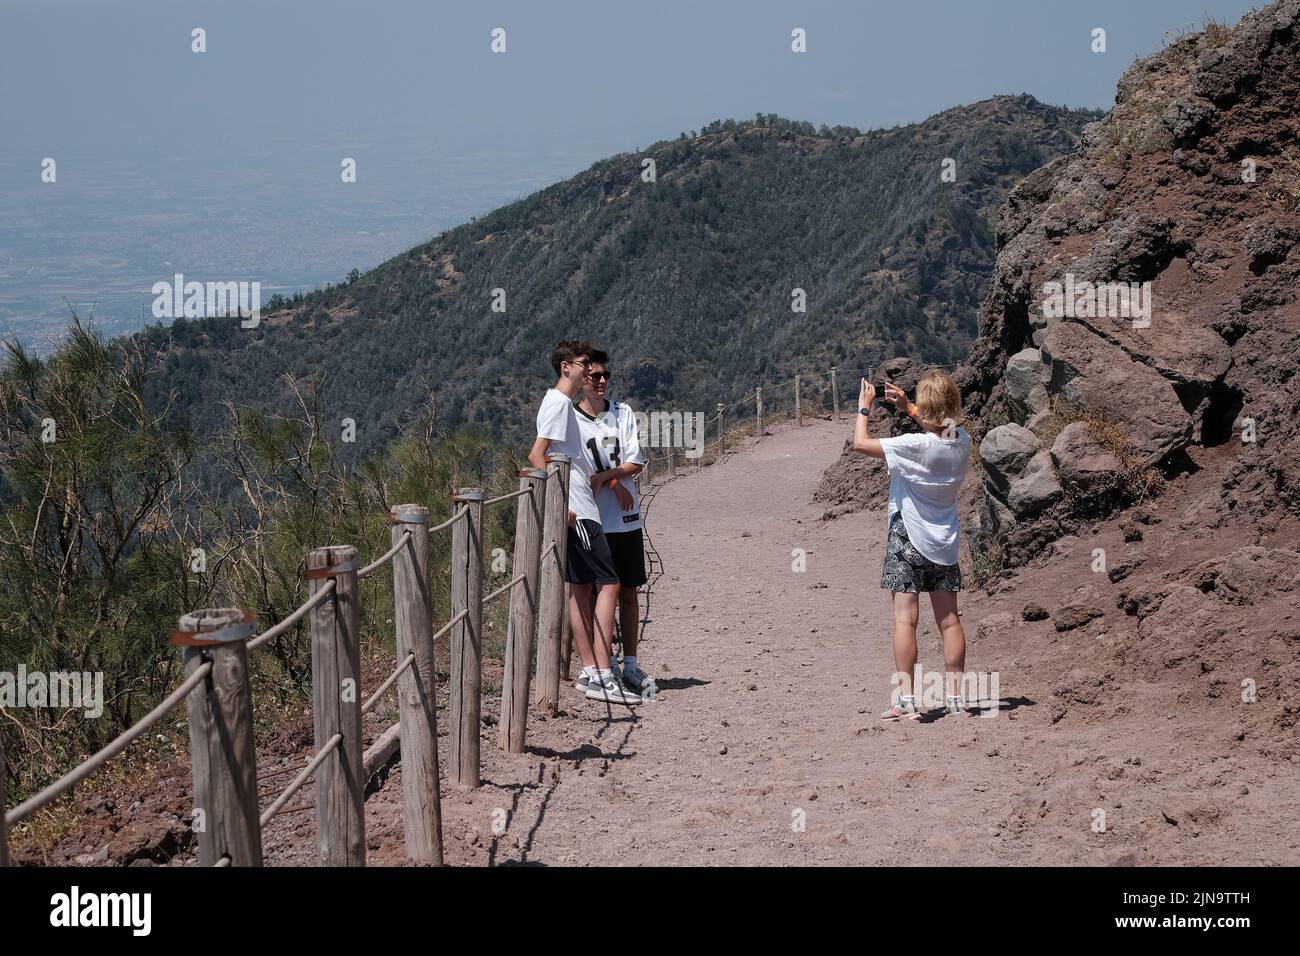 A mum and two sons pose for a family phone picture on the walkway at the top of Mount Vesuvius Italy looking out to the view towards Naples. Stock Photo